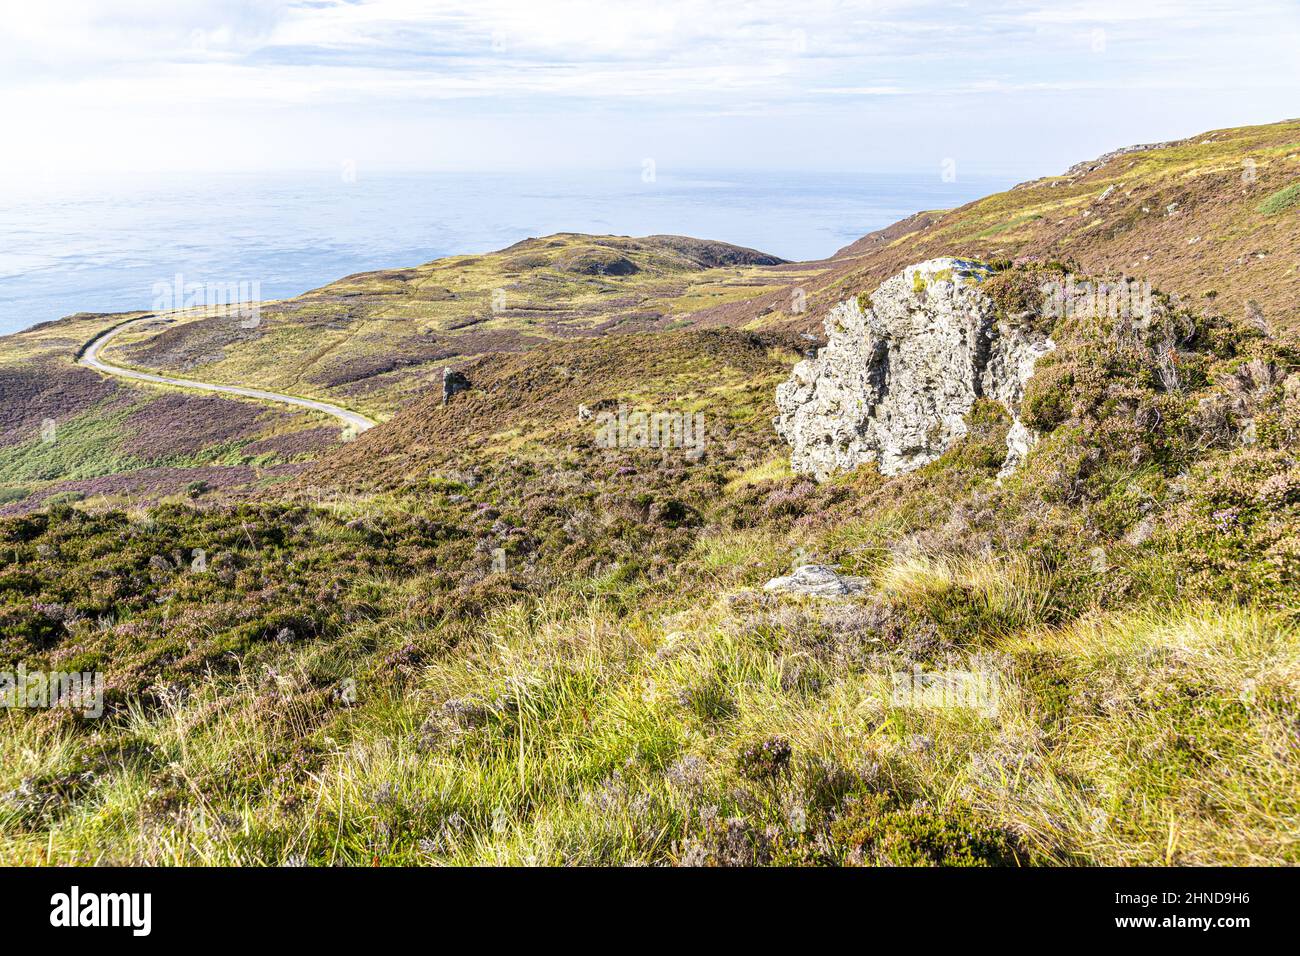 Rocky outcrops on the heather-clad moorland on the Mull of Kintyre at the south end of the Kintyre Peninsula, Argyll & Bute, Scotland UK Stock Photo